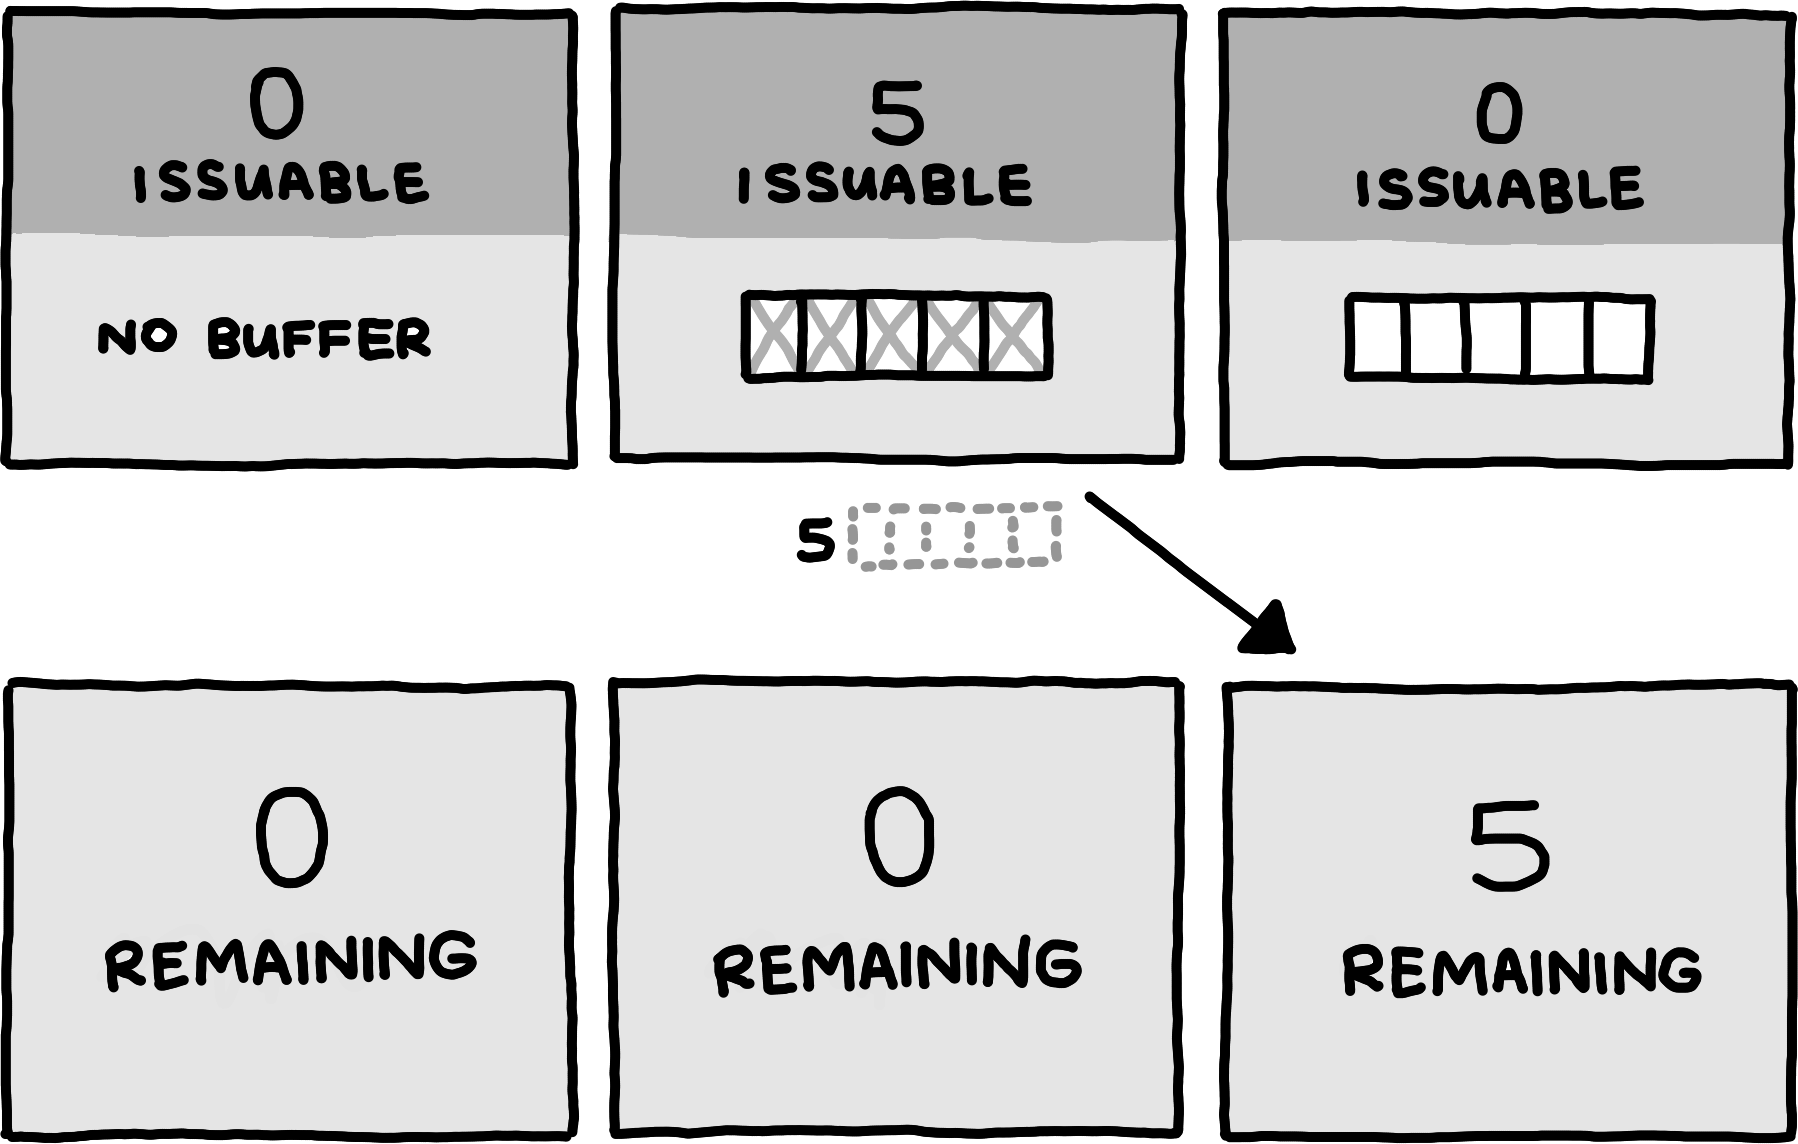 A server-client diagram. Initially, the server has zero issuable guarantees, and a buffer of size zero. The client starts with zero remaining guarantees. In the next step, the server increases its buffer size to five, leaving it with five unissued guarantees. Then, it issues those five guarantees. In the resulting state, the server has zero issuable guarantees left, whereas the available guarantees of the client increase to five.